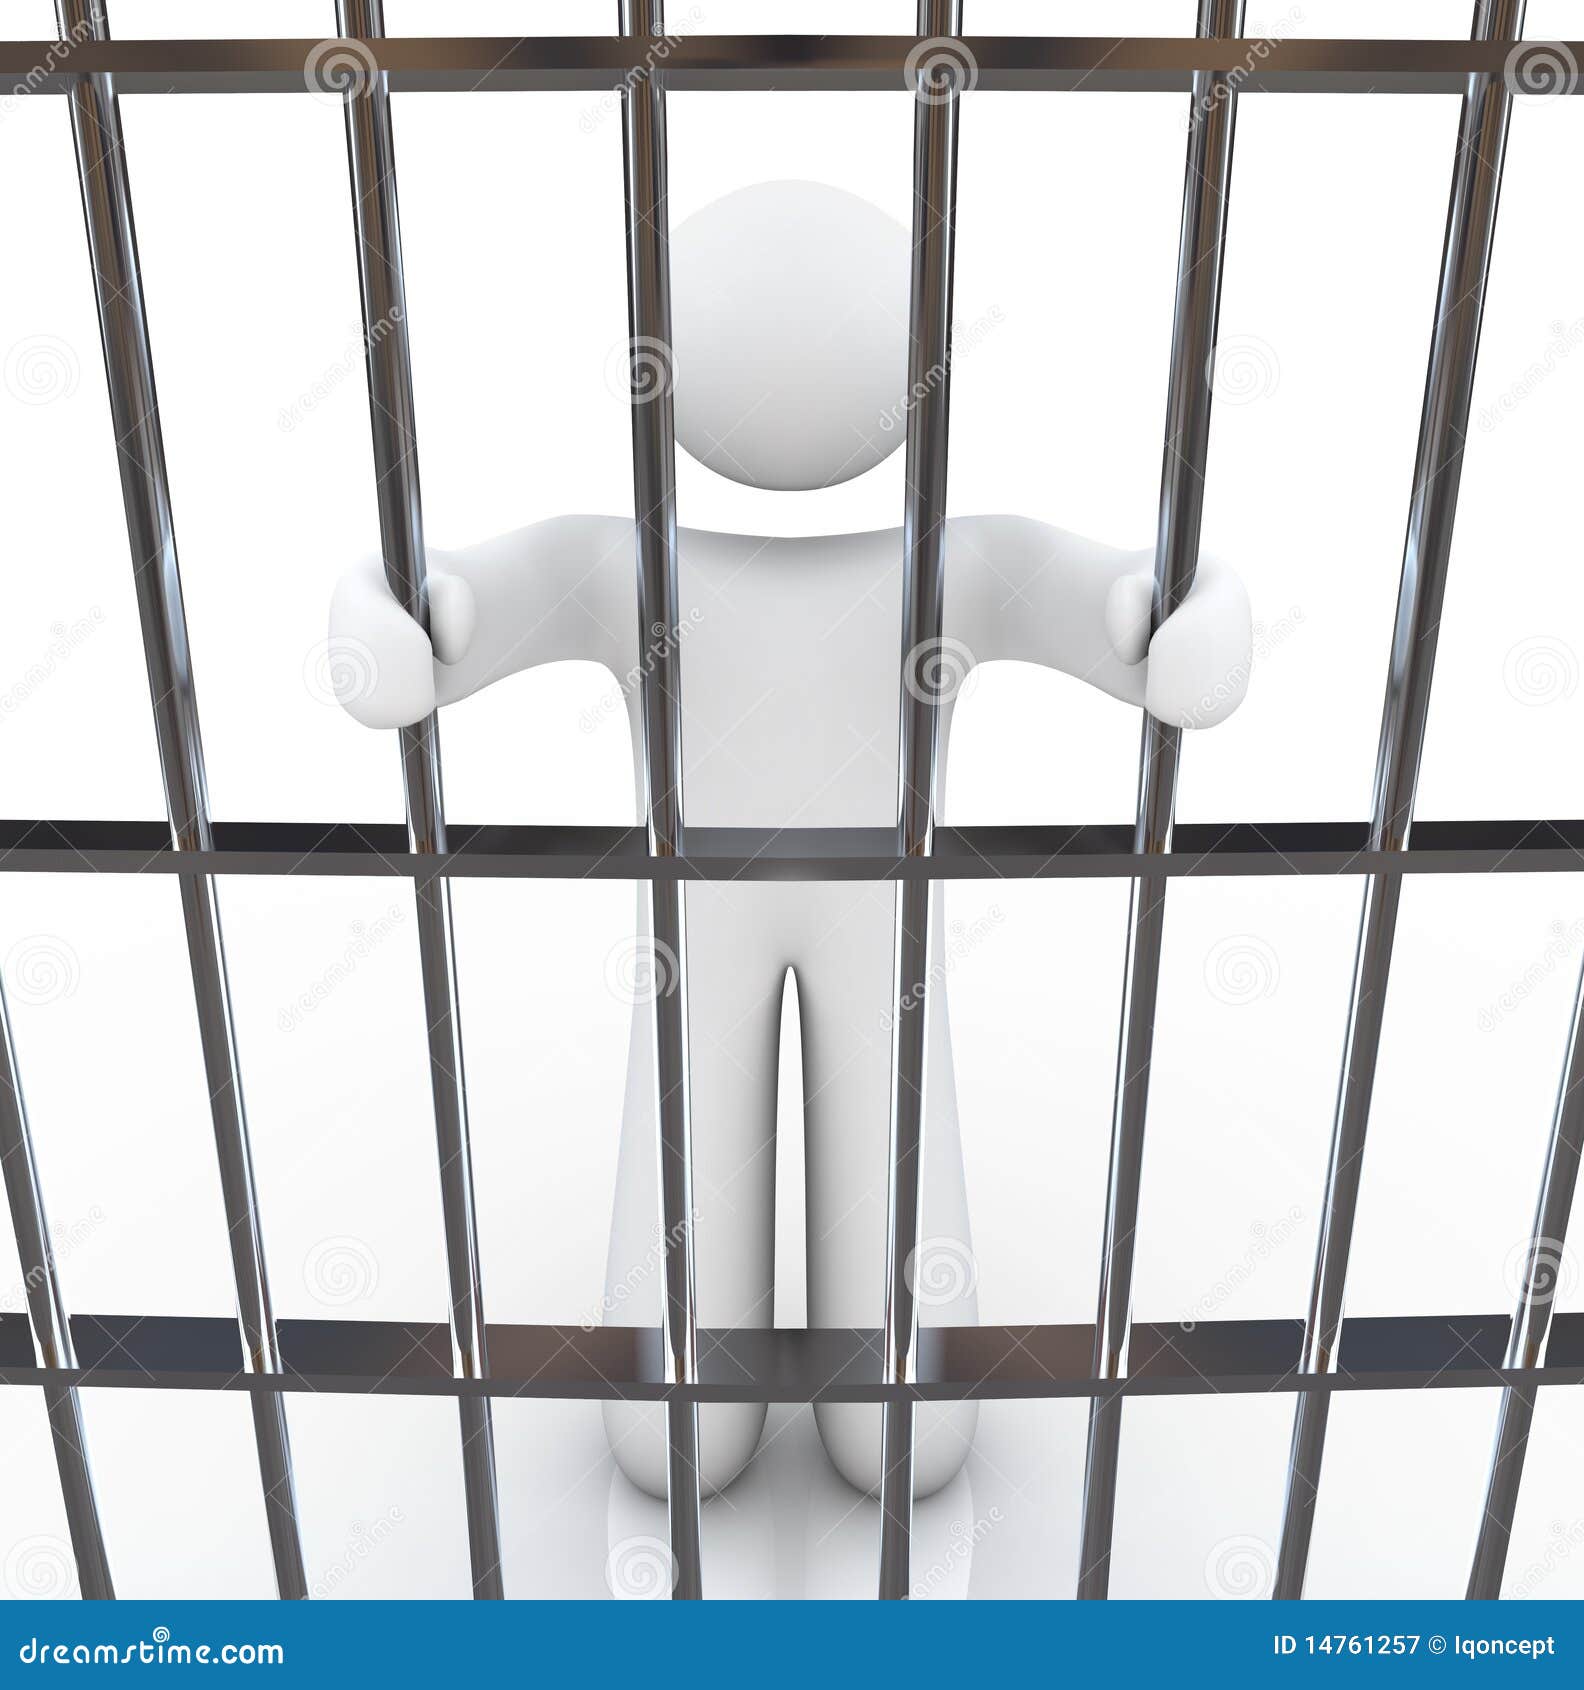 free clipart man in jail - photo #5